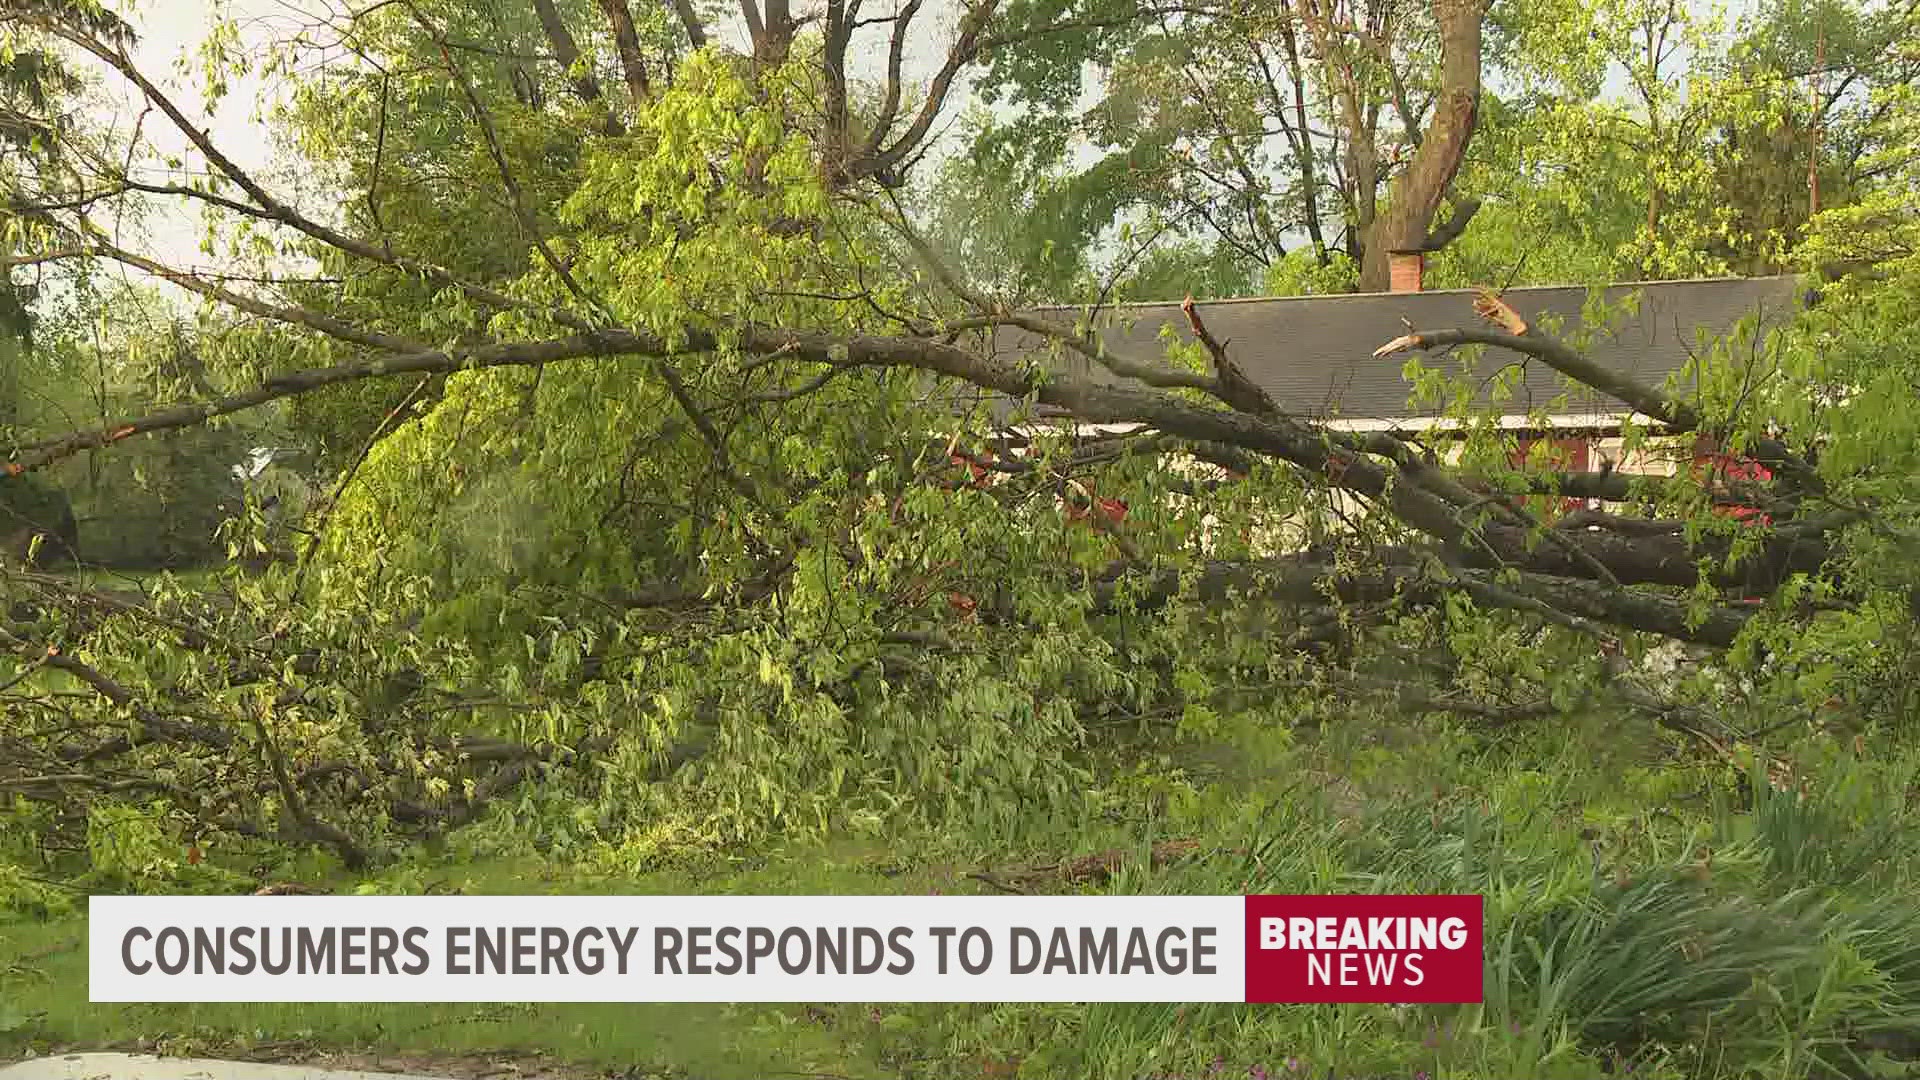 Consumers is working to restore power to over 25,000 people after tornados ripped through southwest MI.